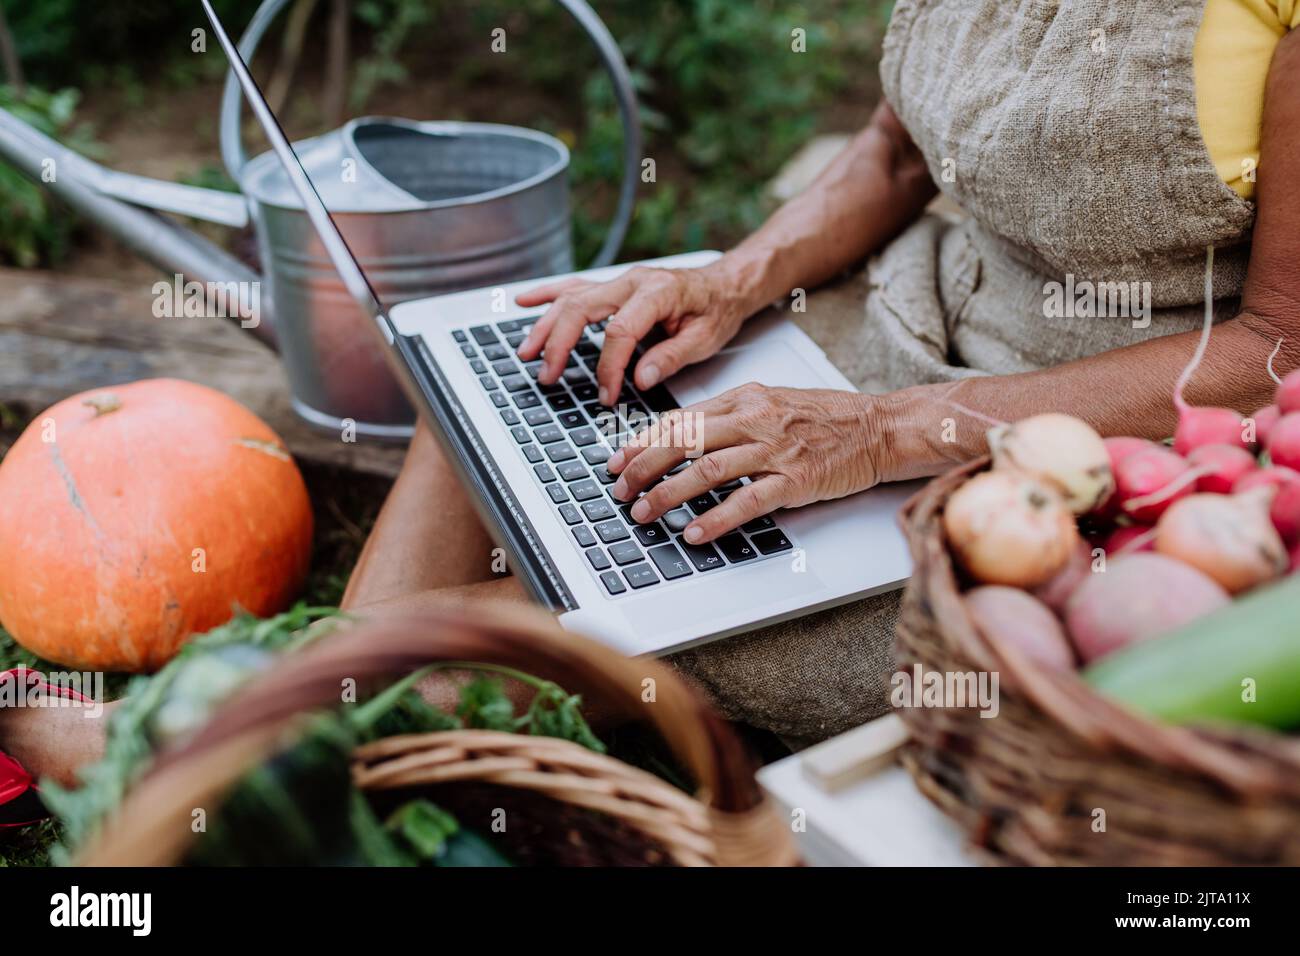 Woman farmer using laptop and handling orders of her homegrown organic vegetables in garden, small business concept. Stock Photo